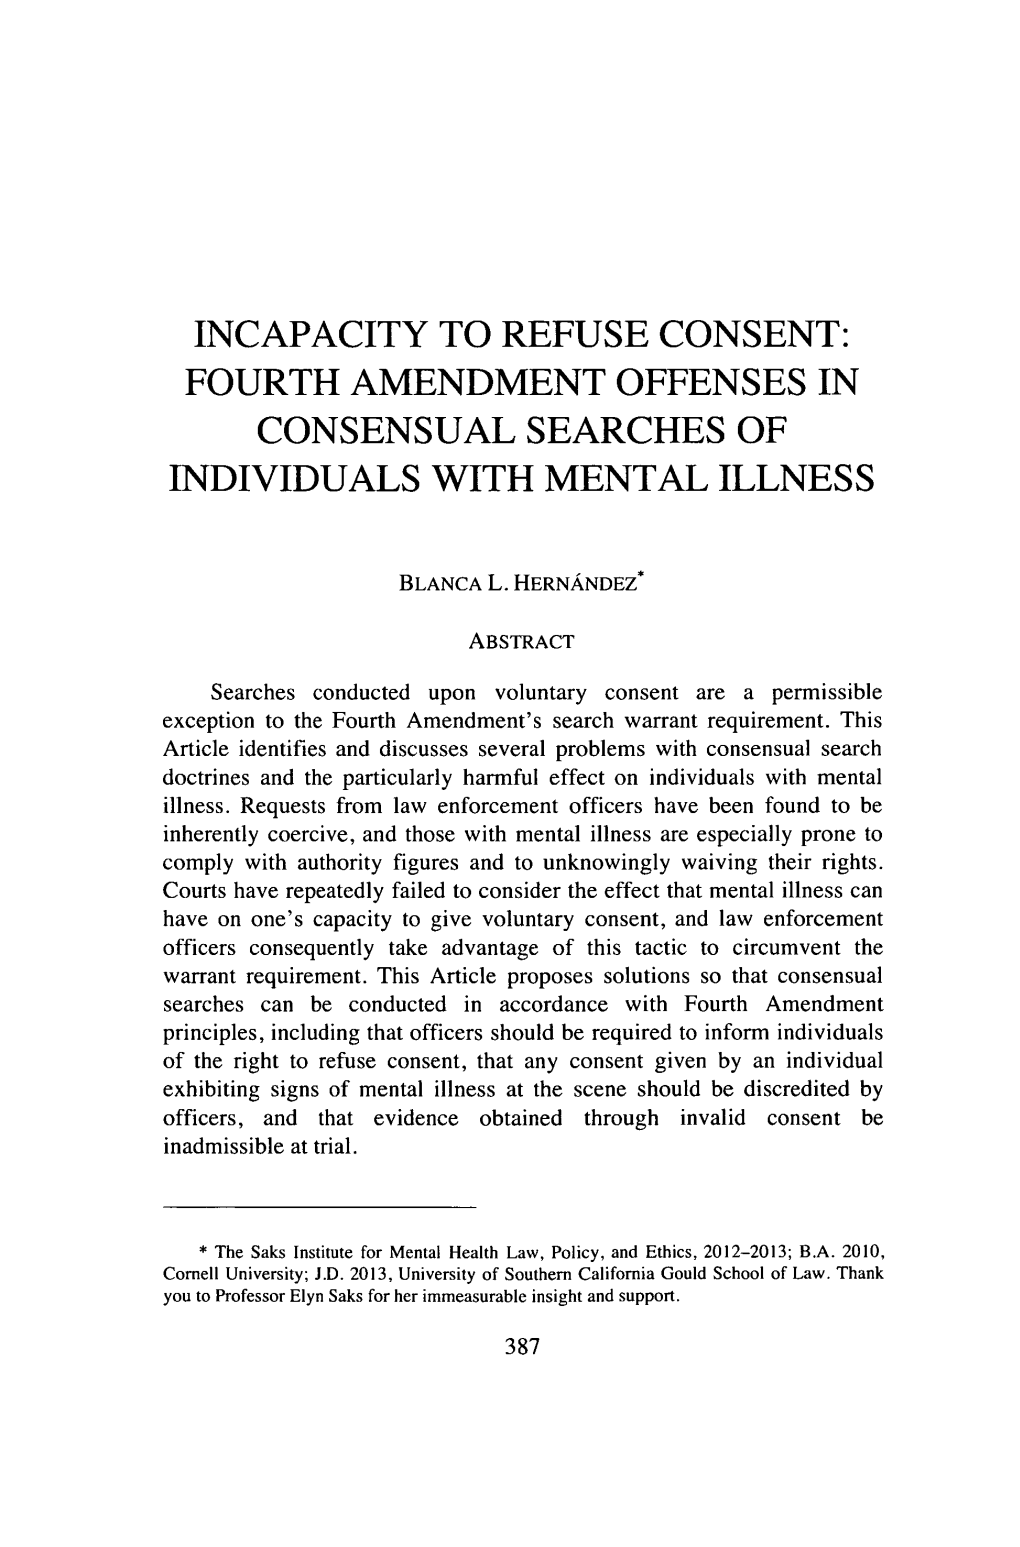 Incapacity to Refuse Consent: Fourth Amendment Offenses in Consensual Searches of Individuals with Mental Illness